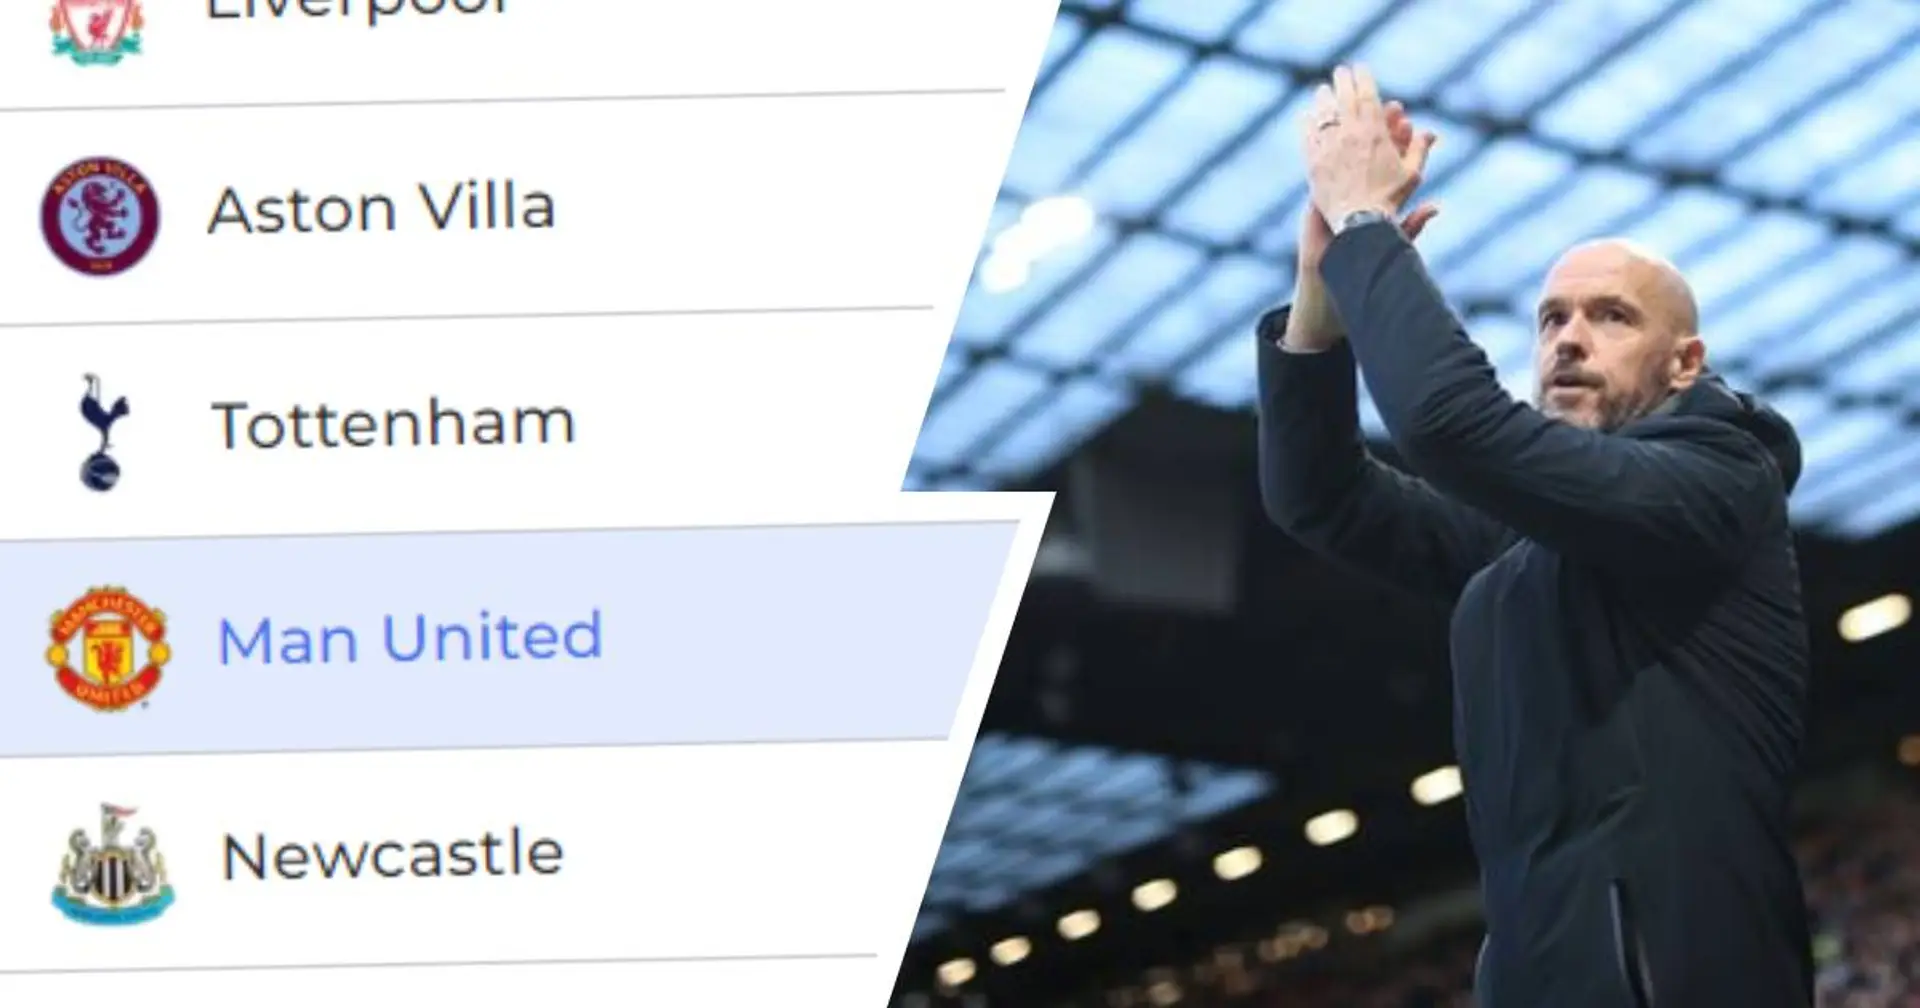 Will Man United play in Europe next season if they finish 7th? Answered